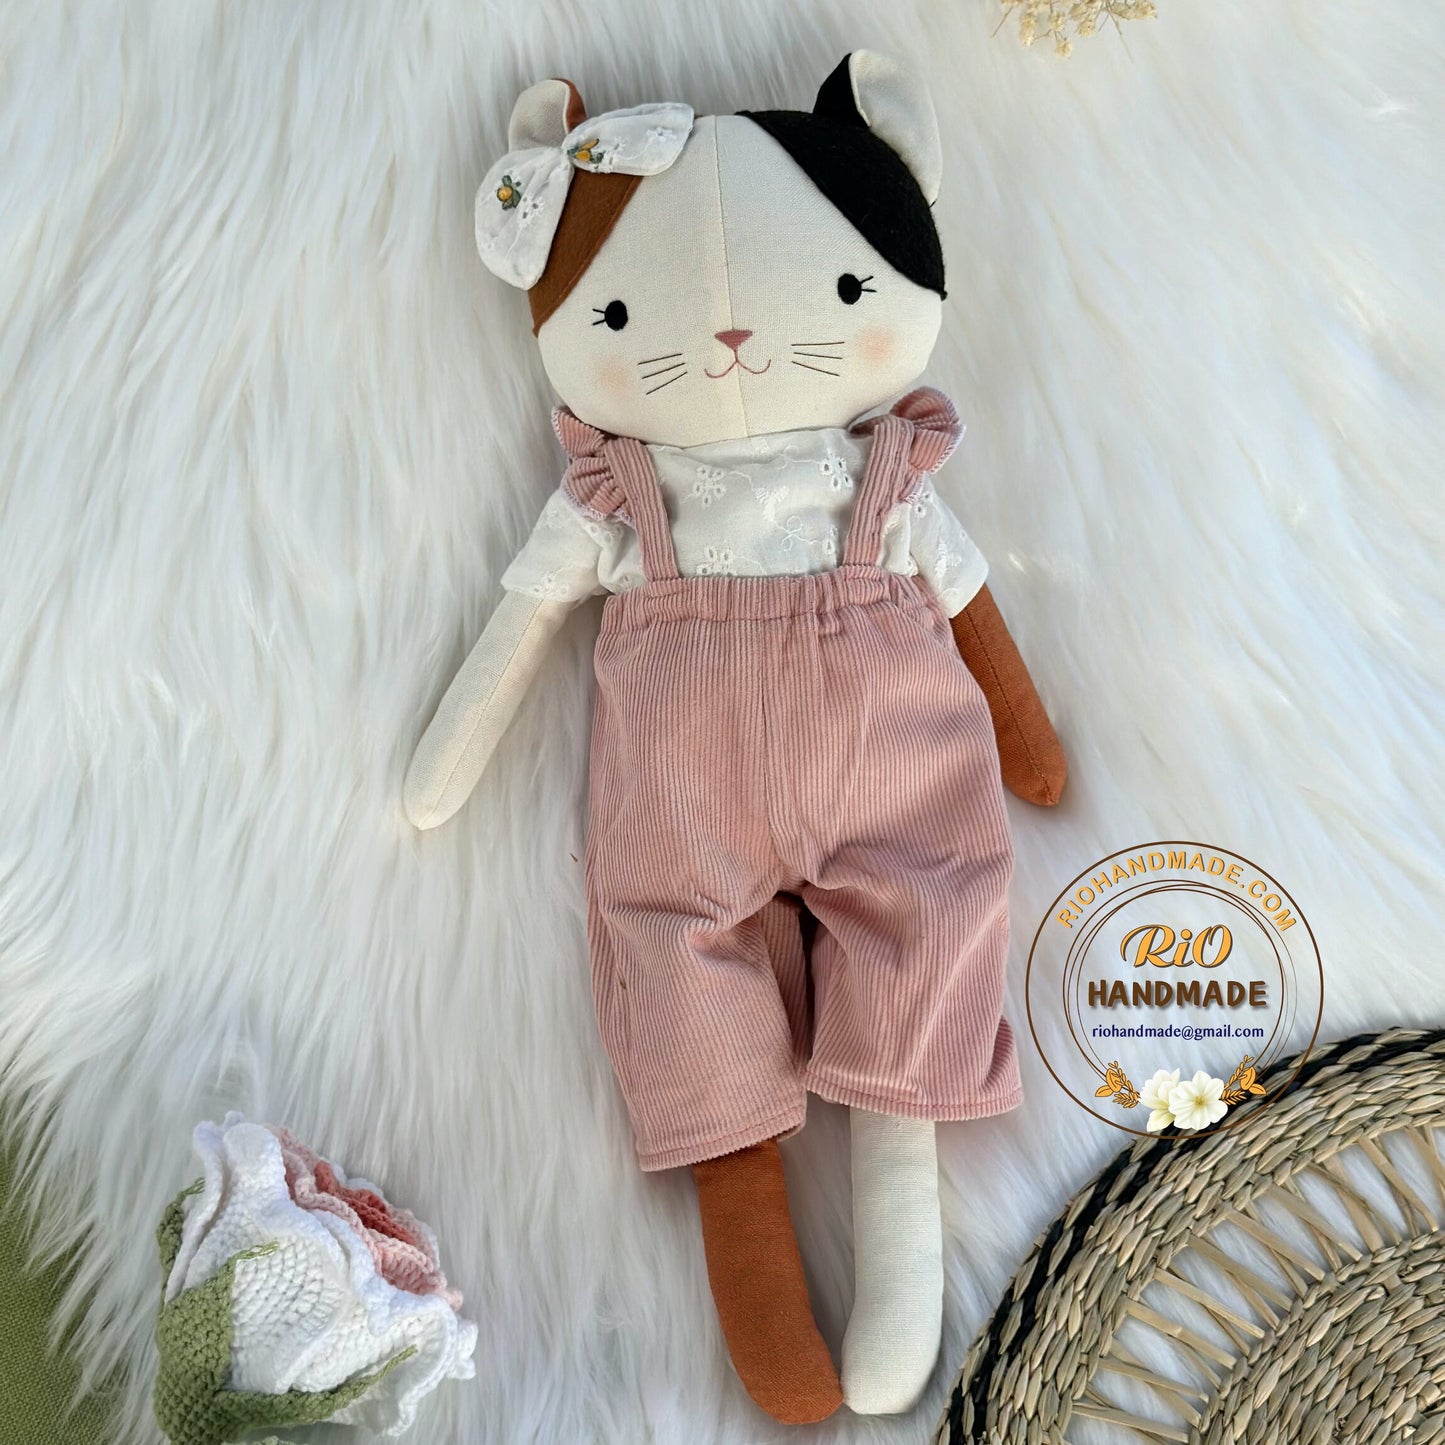 Ready To Ship, Rio Handmade Linen Cat Doll, Nursery Decor Stuffed, Linen Baby Toy, Stuffed Cat Toy For Toddler, Kid, Adult Hobby